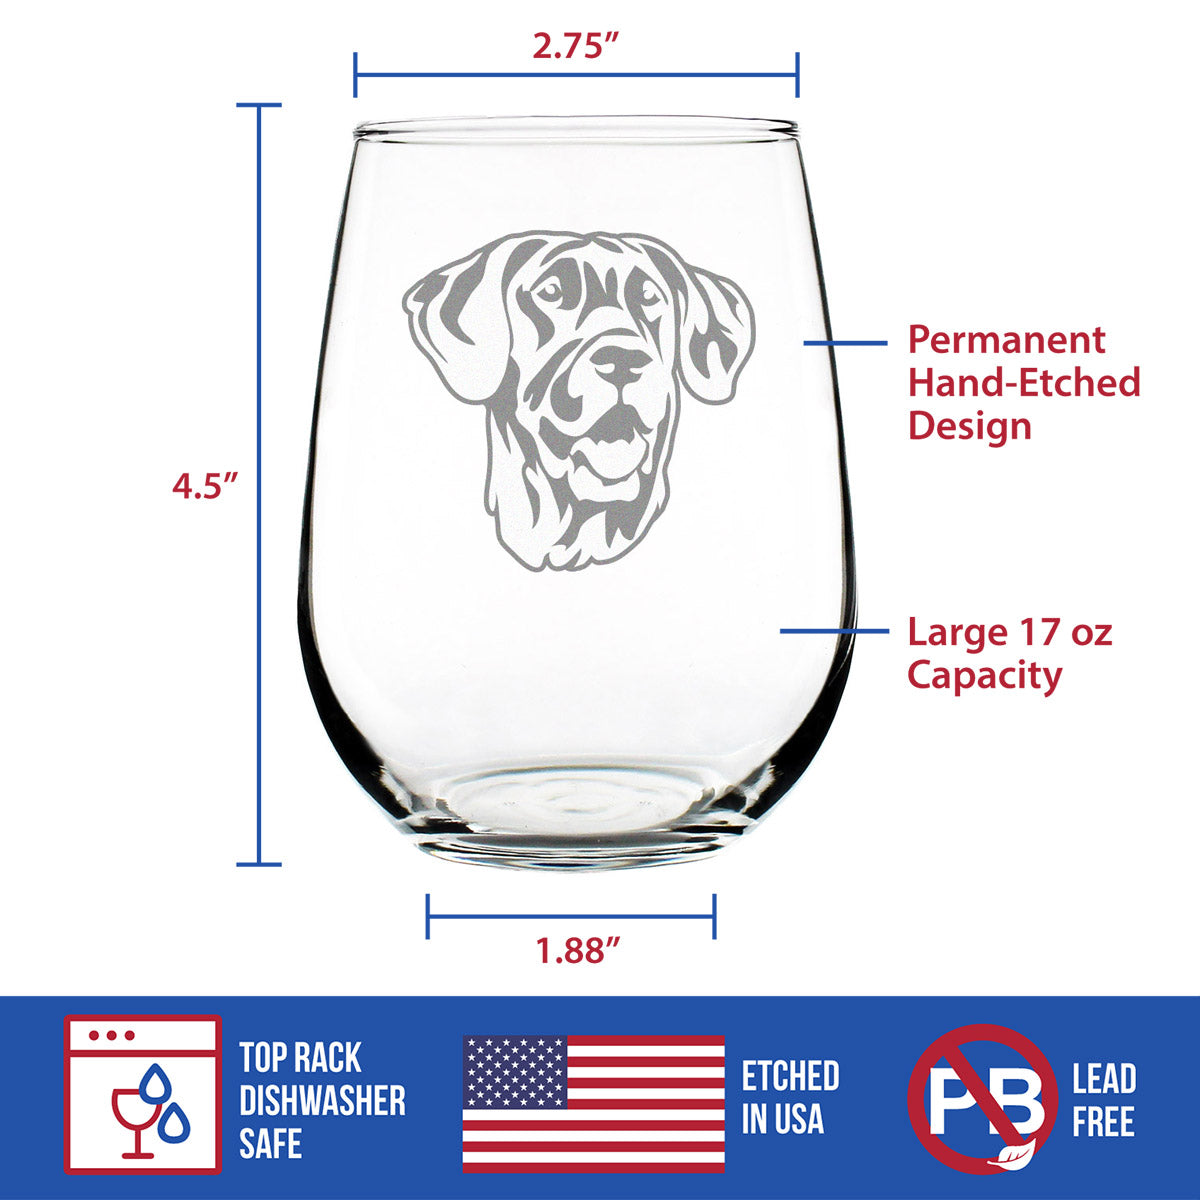 Great Dane Face Stemless Wine Glass - Cute Gifts for Dog Lovers with Great Danes - Large Glasses